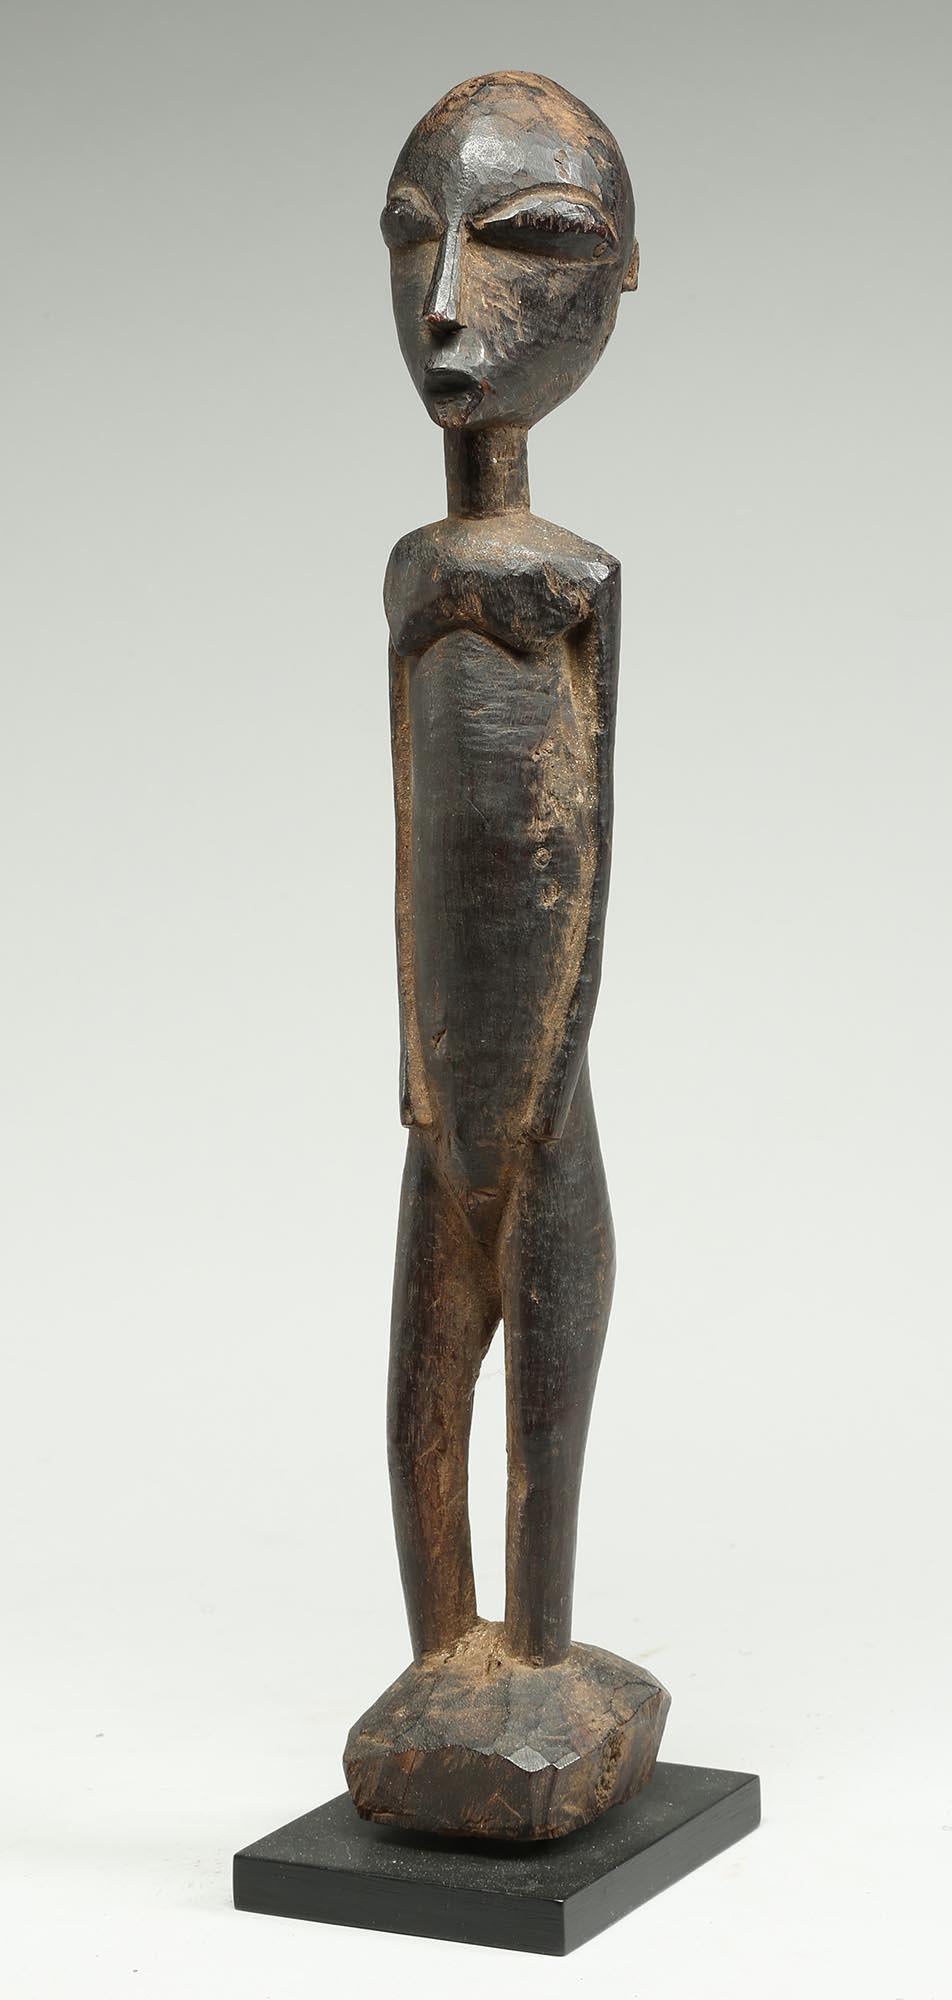 Ghanaian Tall Elegant Standing Lobi Figure with Expressive Face, Early 20th Century Ghana